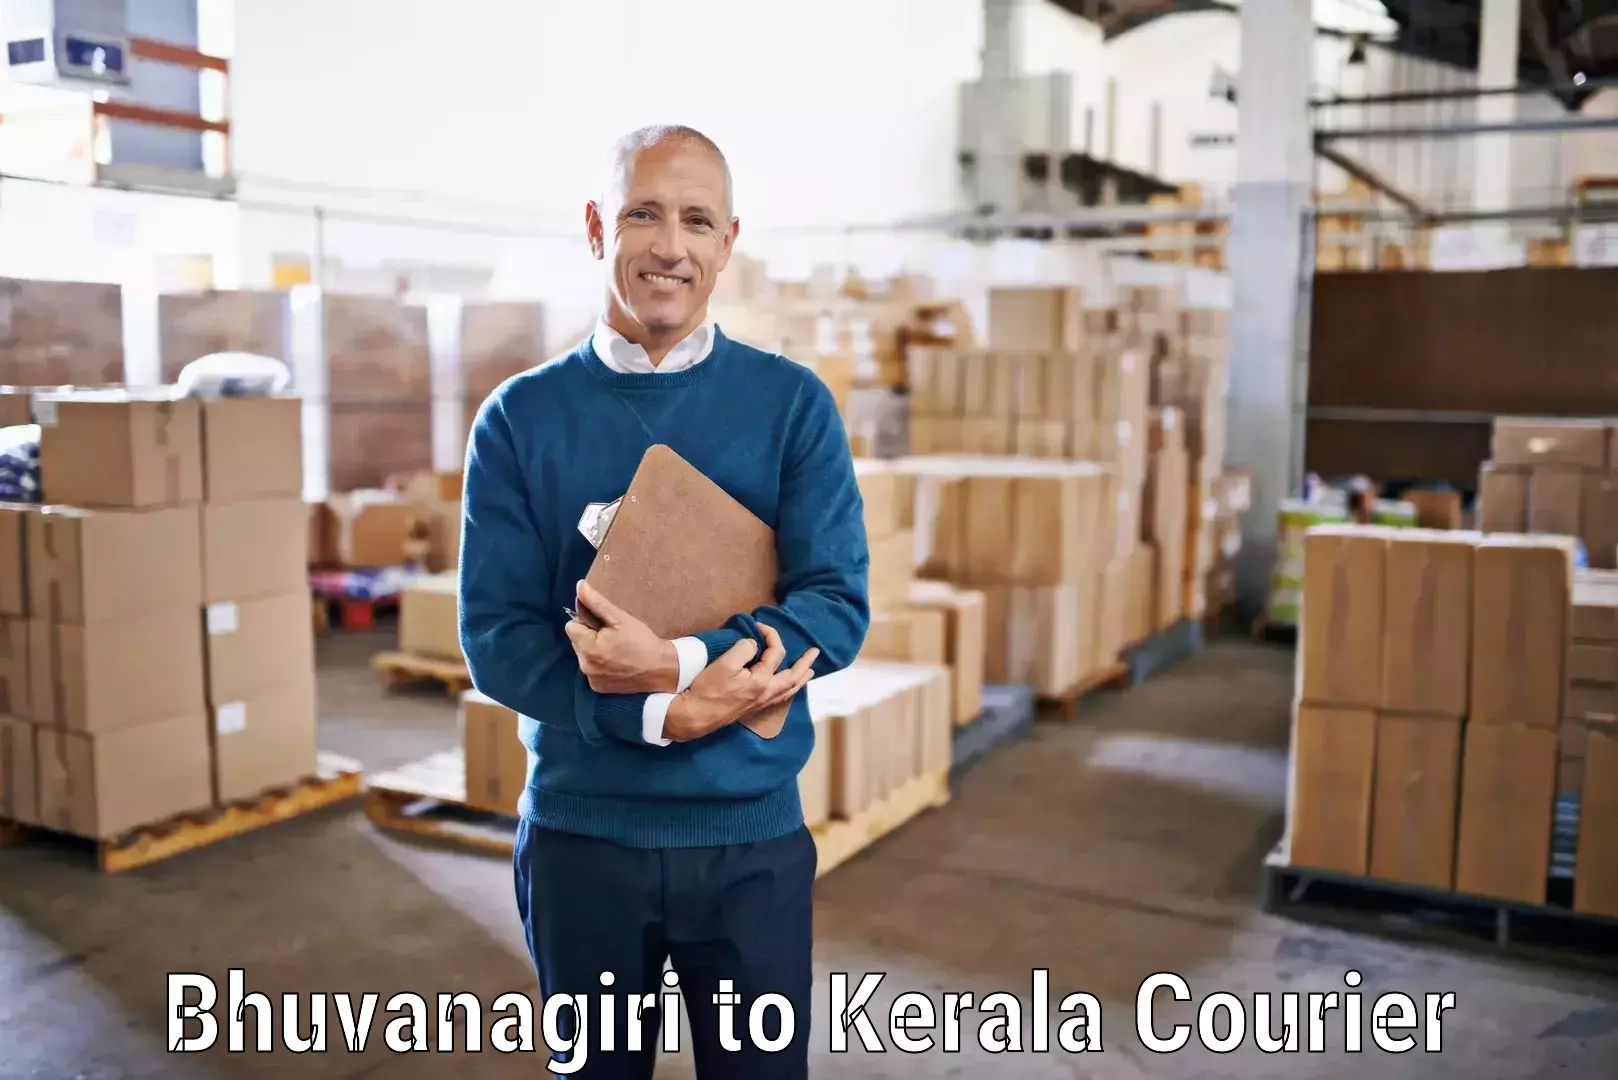 User-friendly courier app Bhuvanagiri to Cochin University of Science and Technology